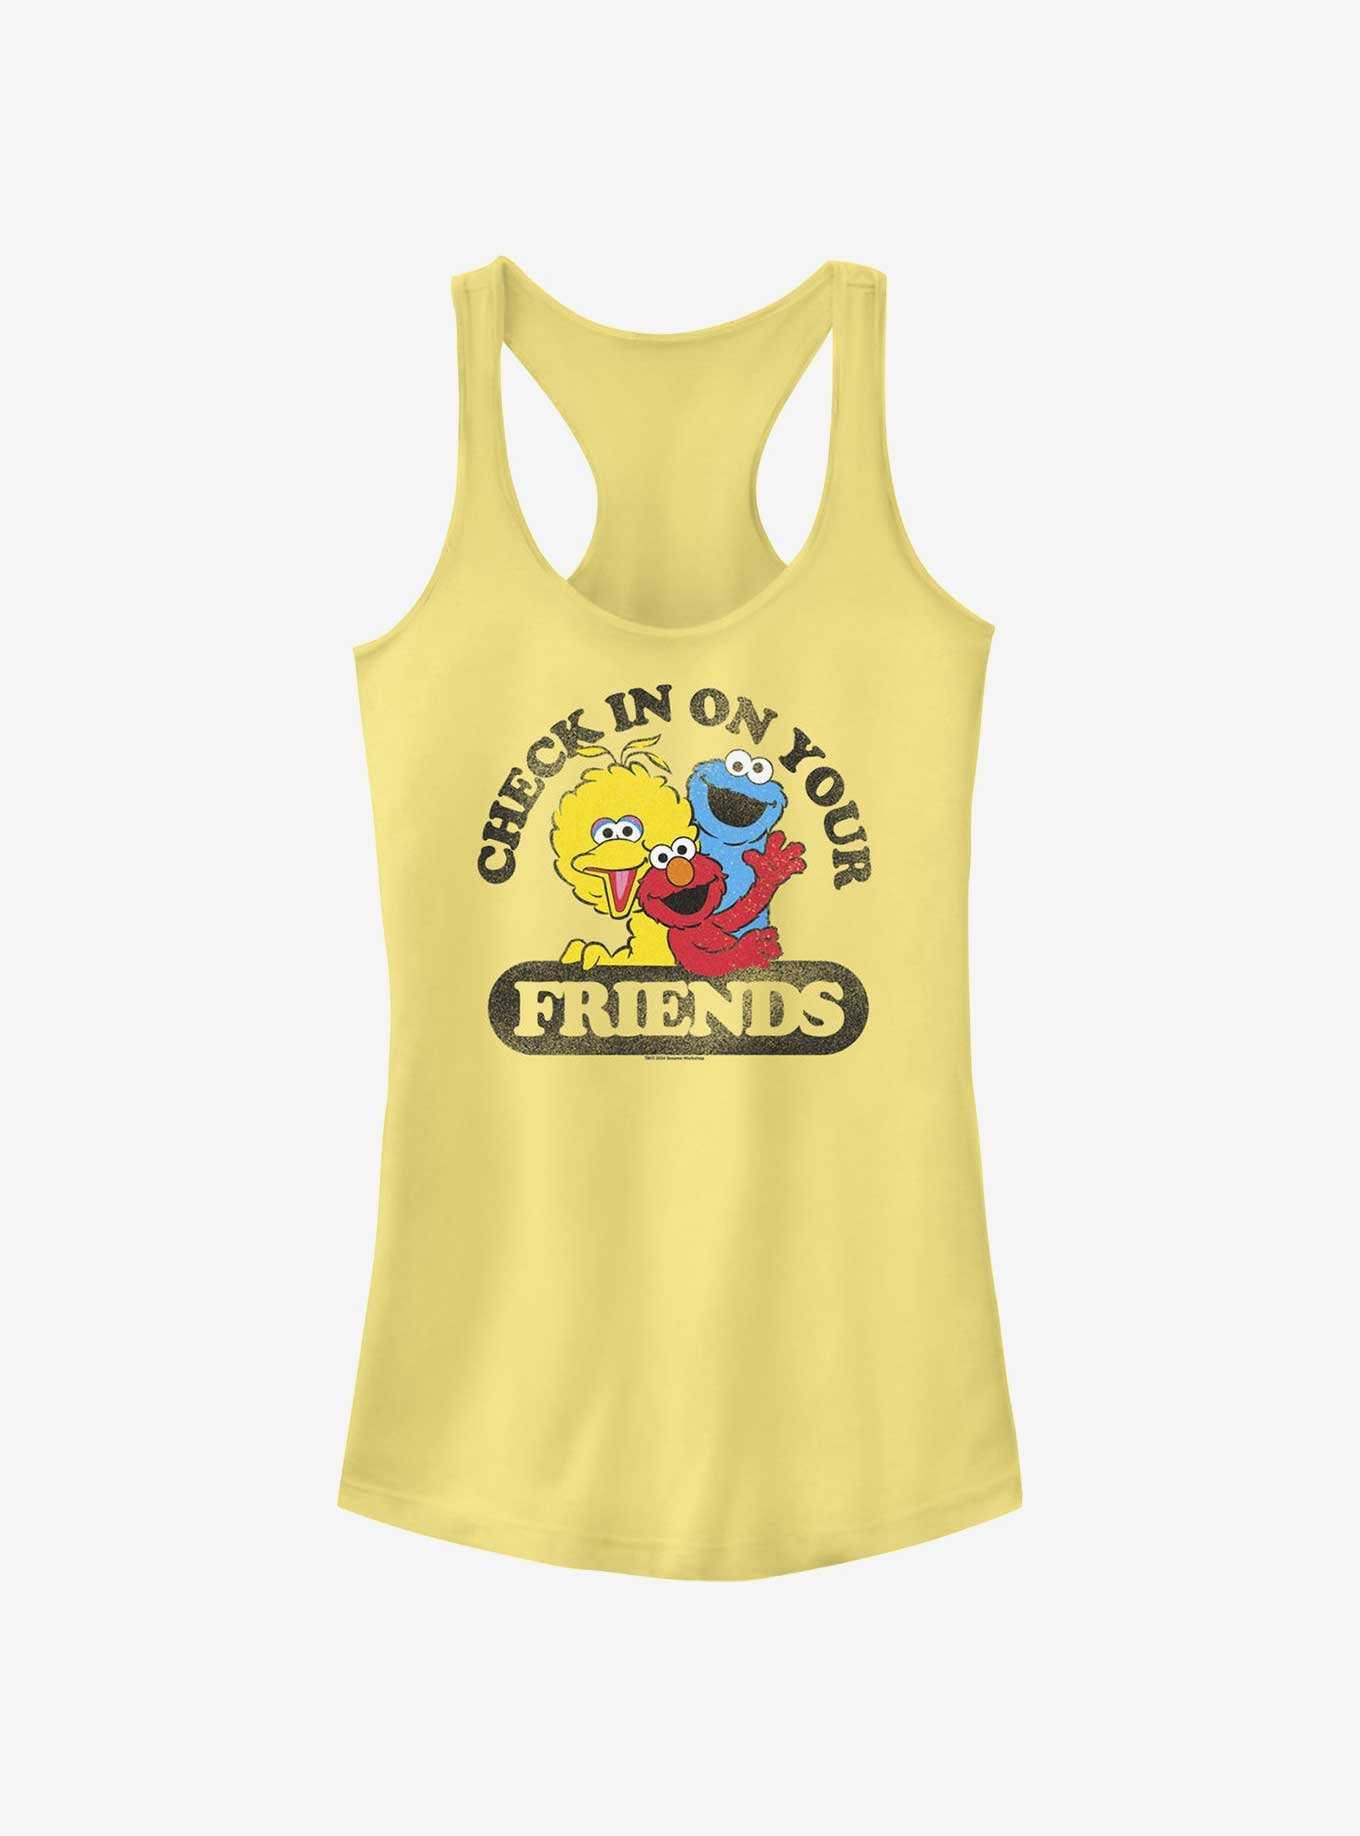 Sesame Street Check In On Your Friends Big Bird Cookie Monster and Elmo Girls Tank, , hi-res